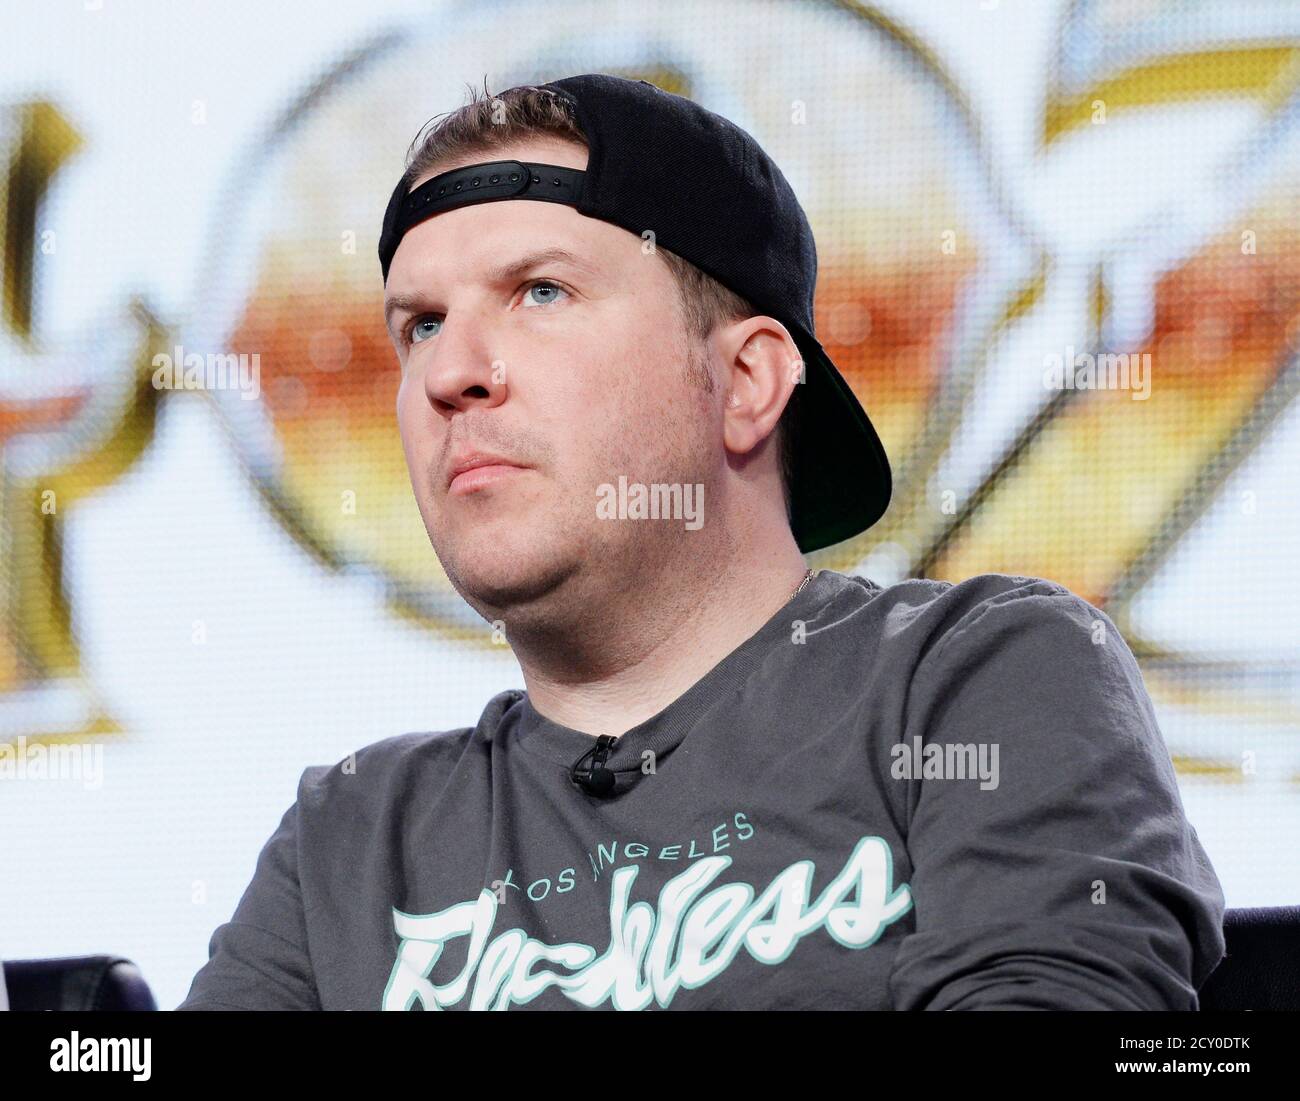 Cast member Nick Swardson of the new animated comedy "Chozen" participates  in a panel during FX Networks' part of the Television Critics Association  (TCA) Winter 2014 presentations in Pasadena, California, January 14,